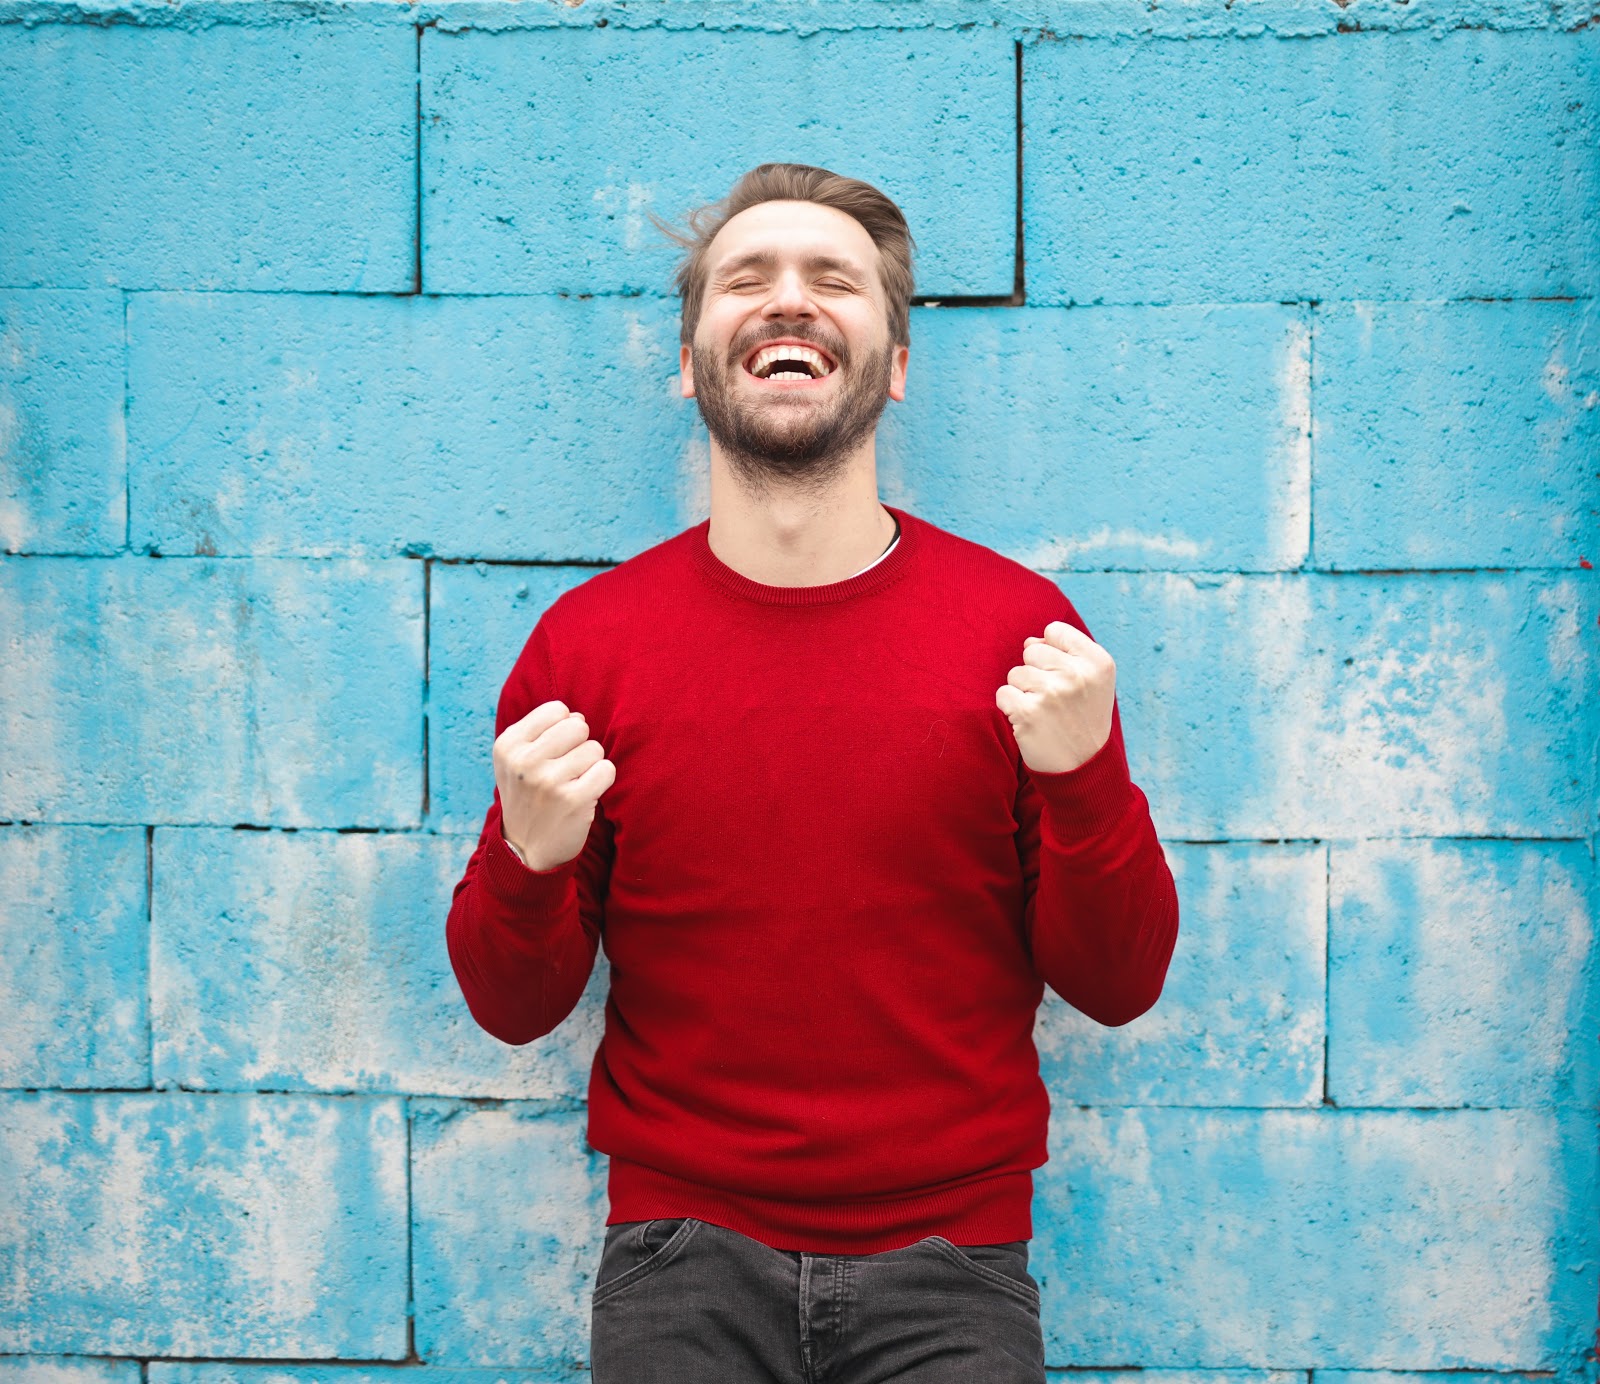 Cheerful man in front of a blue wall